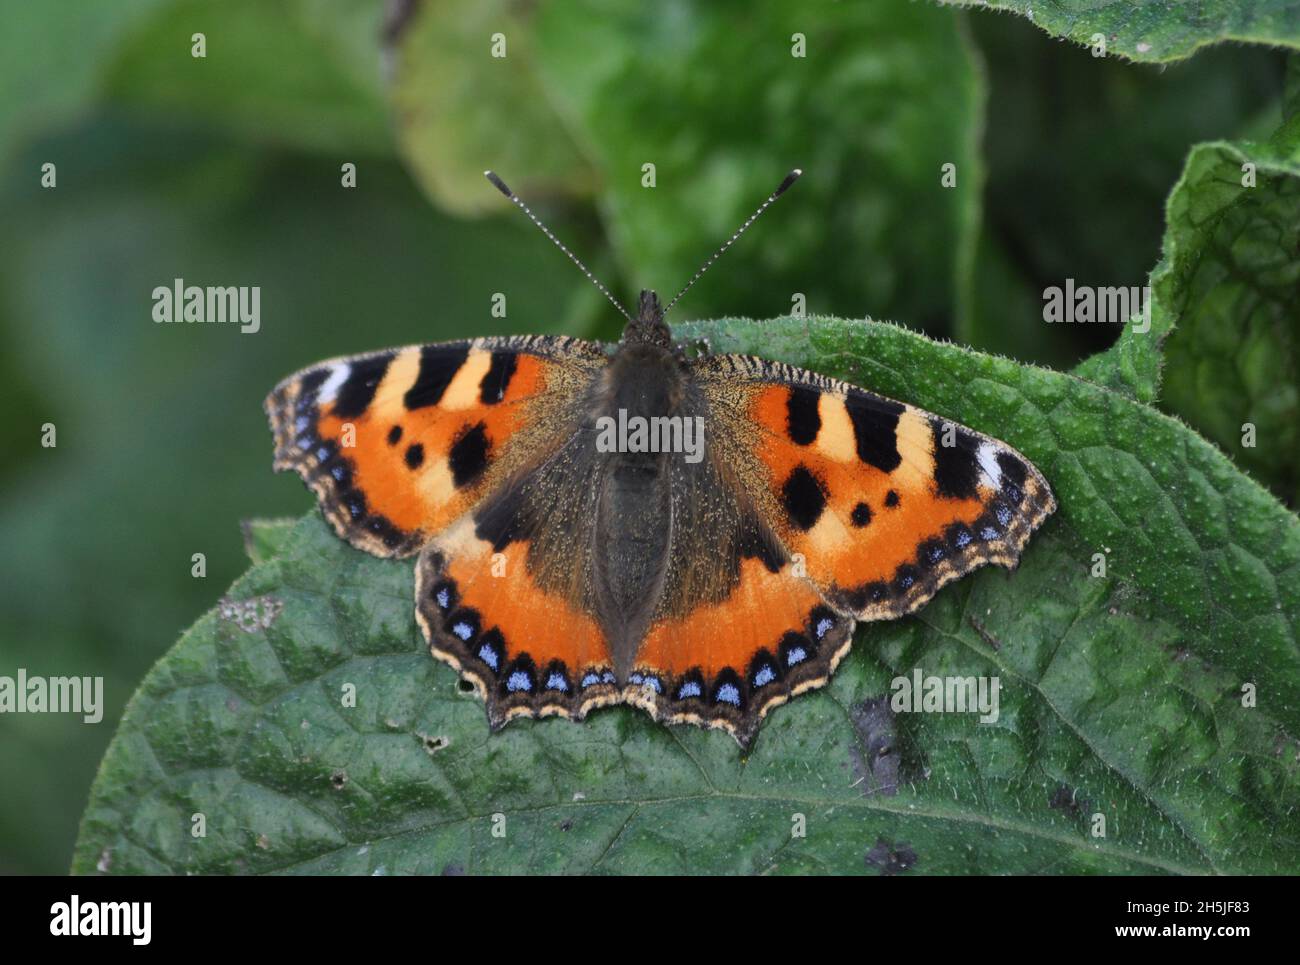 A small tortoiseshell butterfly (Aglais urticae) resting on a green leaf in the UK Stock Photo